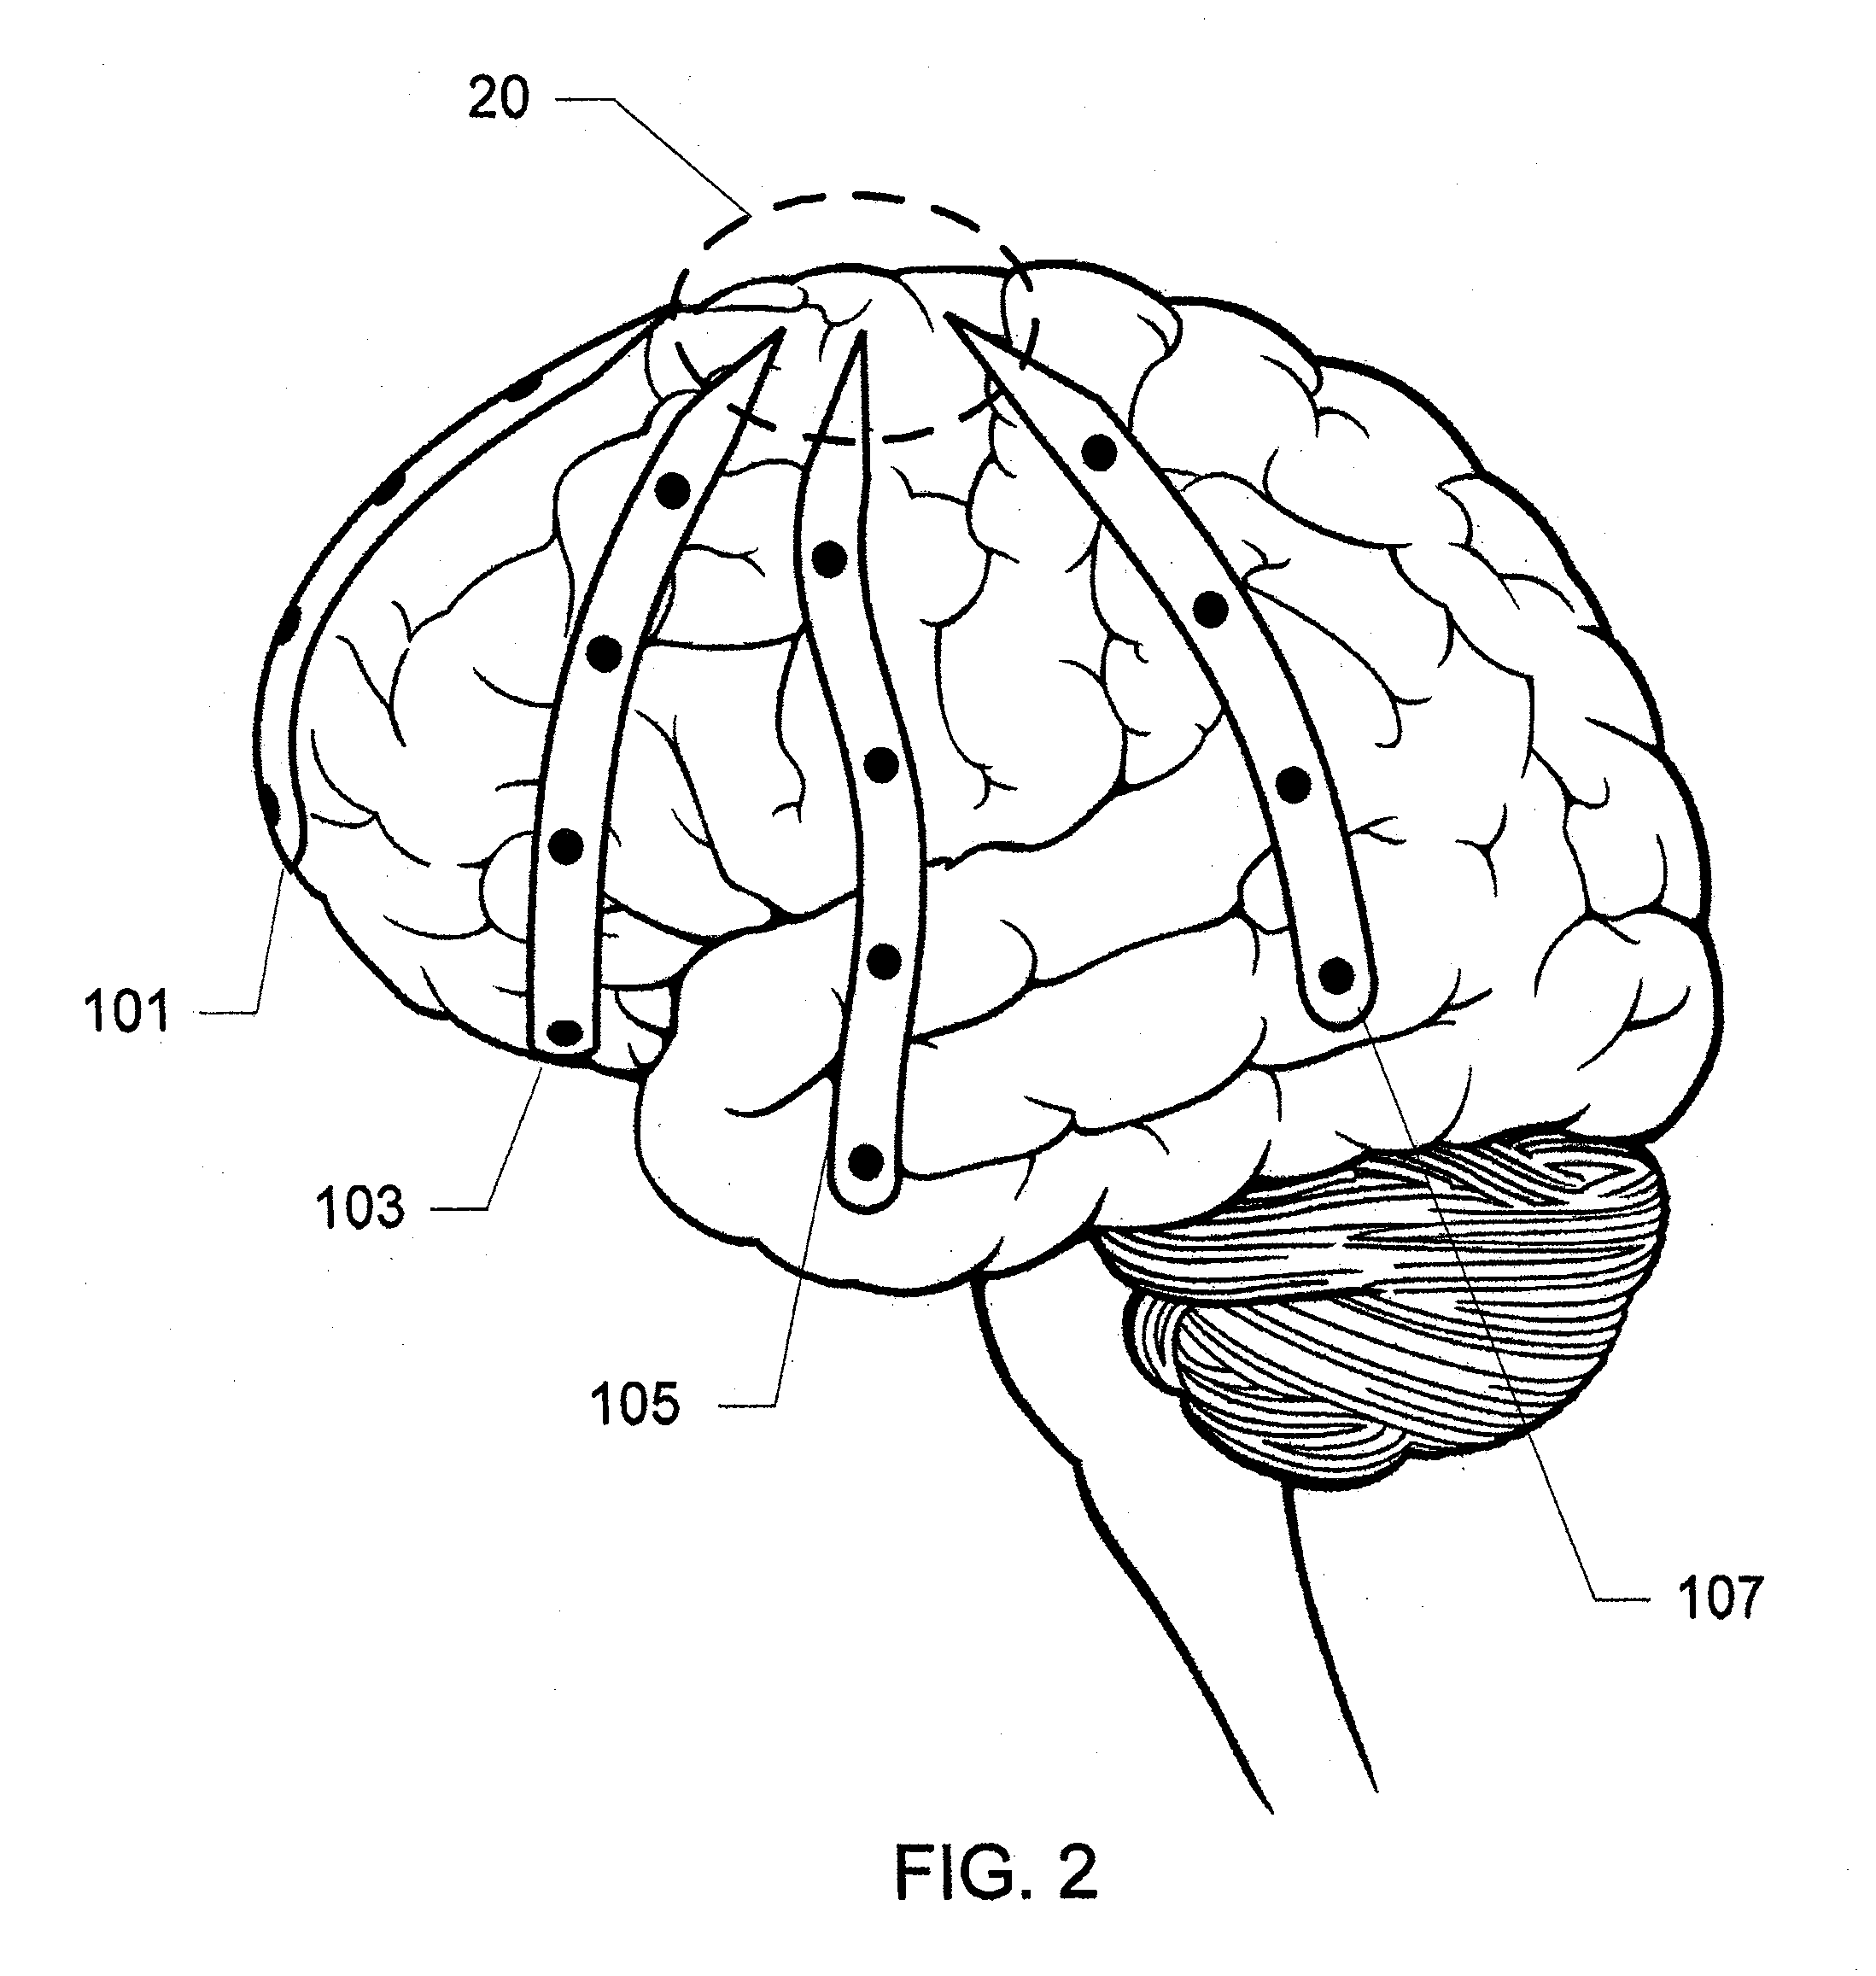 Universal Electrode Array for Monitoring Brain Activity